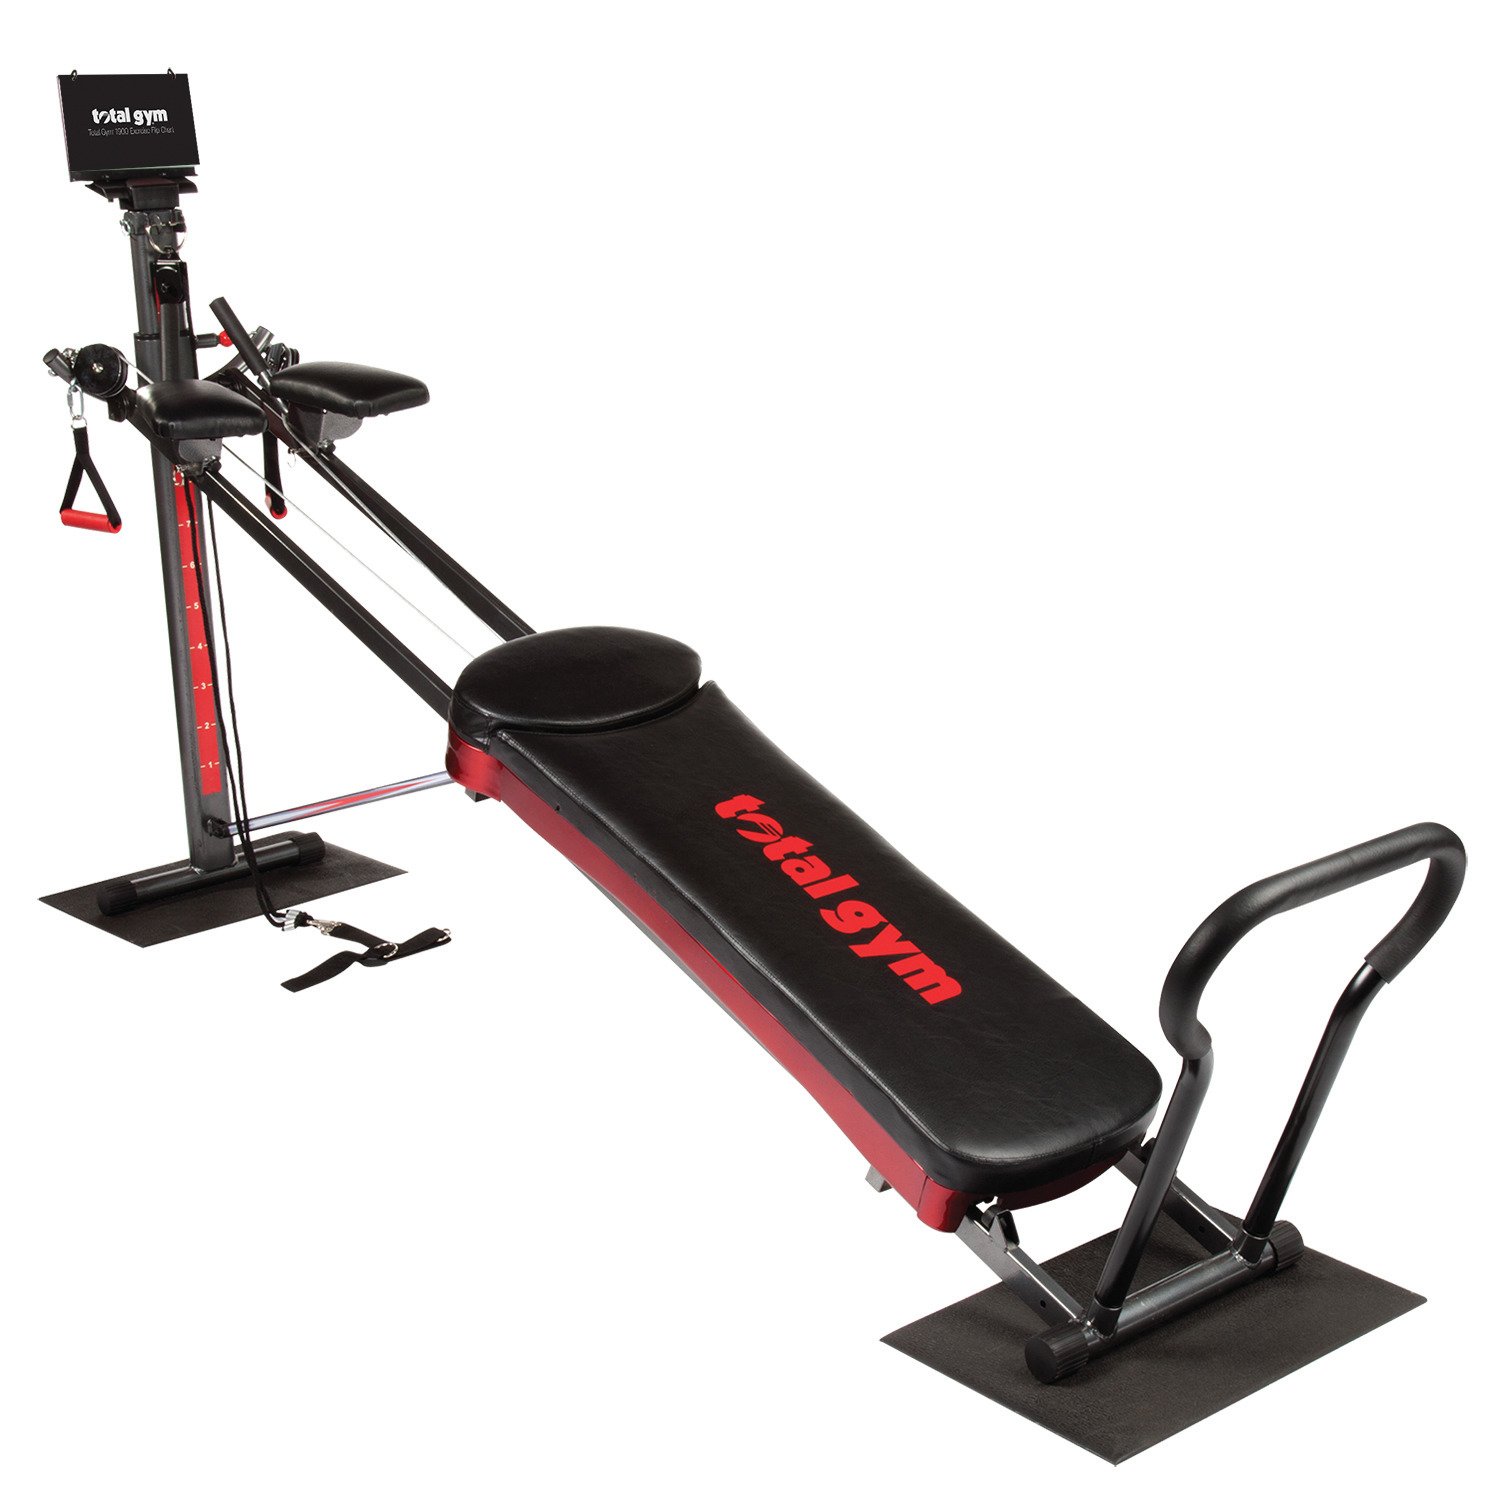 buy home workout equipment